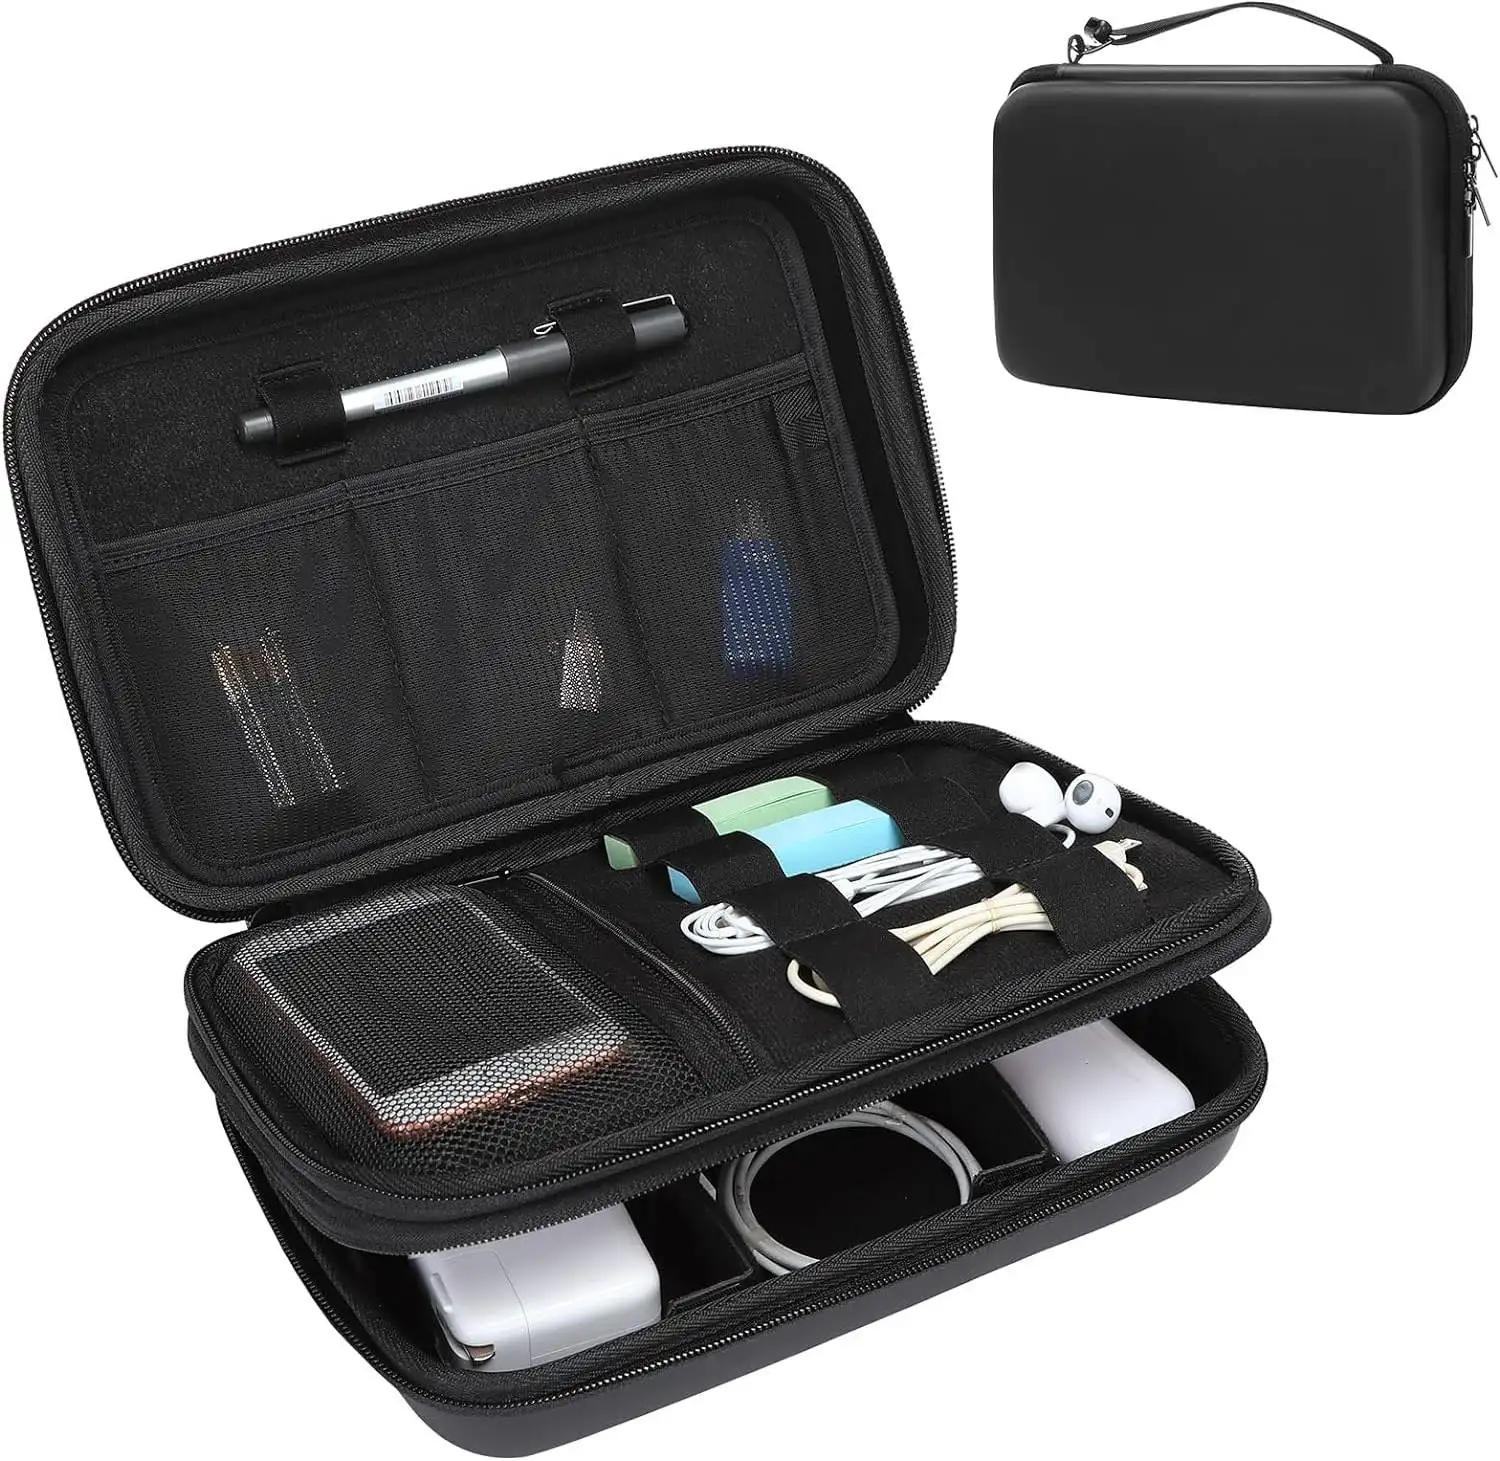 Shockproof hard Travel Organizer carrying case for charger, phone, earphone, mouse and electronic accessories